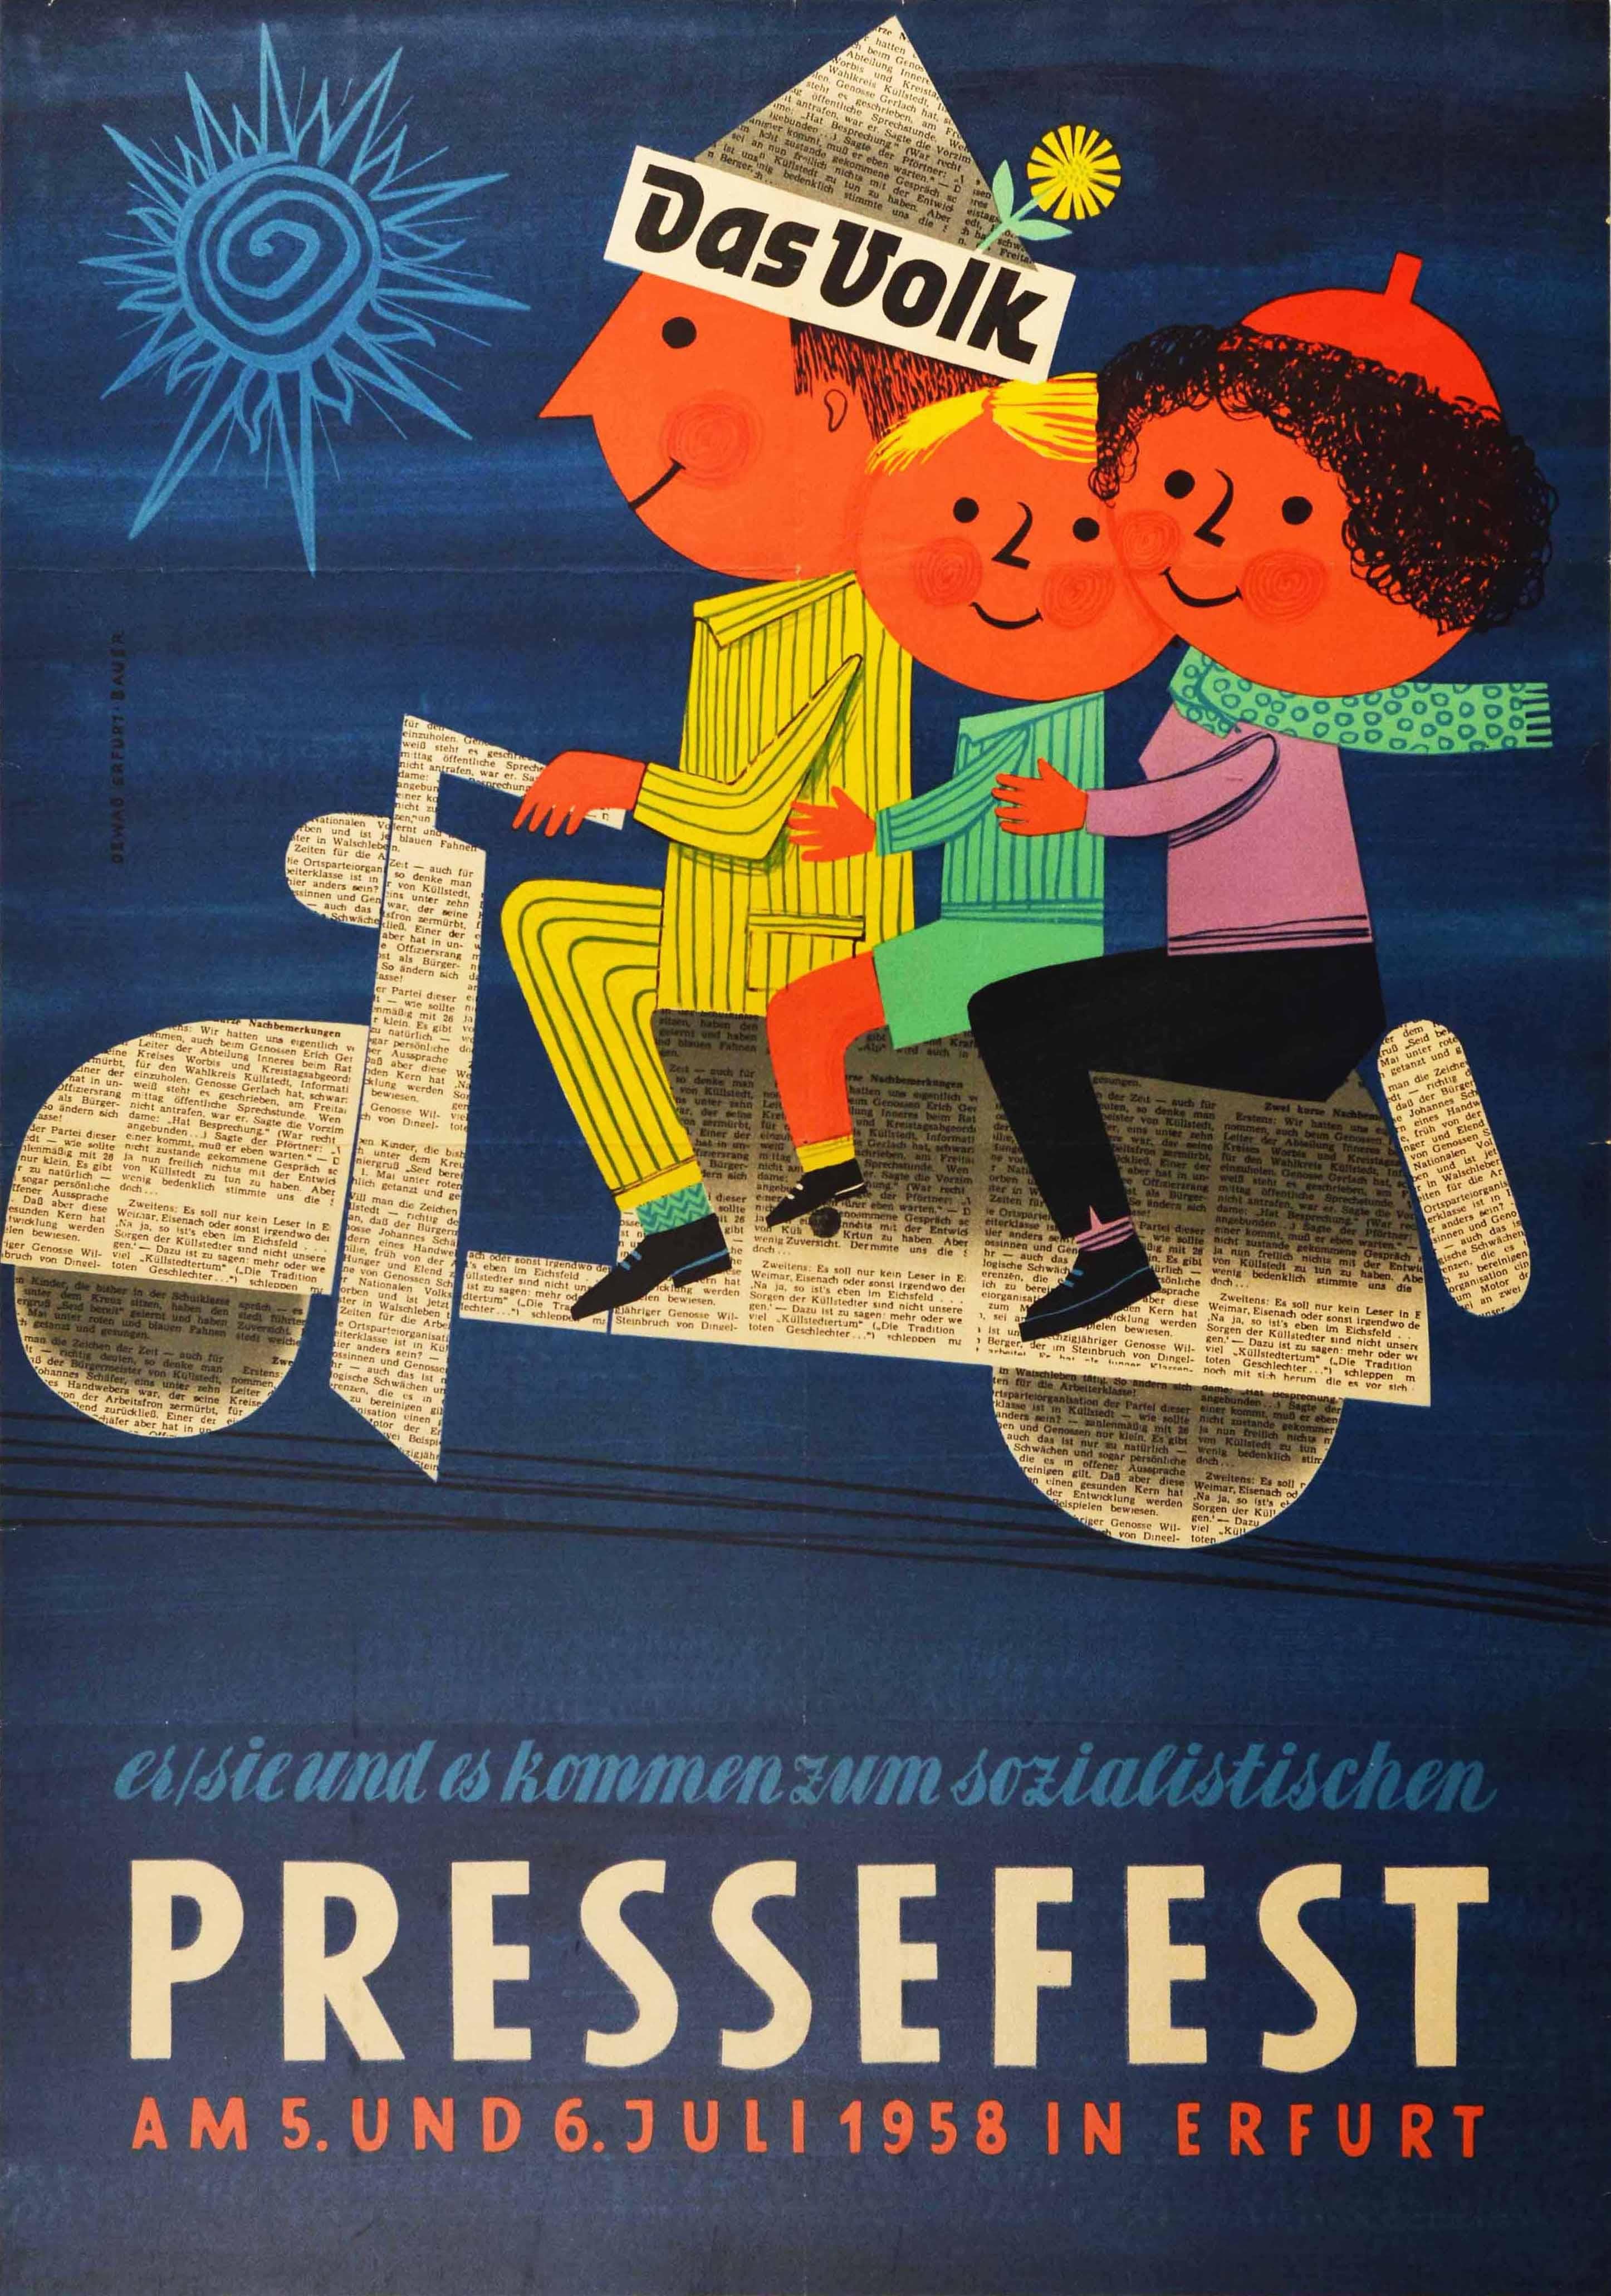 Original vintage advertising poster for the Socialist Press Festival held on 5 and 6 July 1958 in Erfurt Germany featuring a colourful and fun mid-century illustration of a smiling family with a mother in a beret hat, purple jumper, black trousers